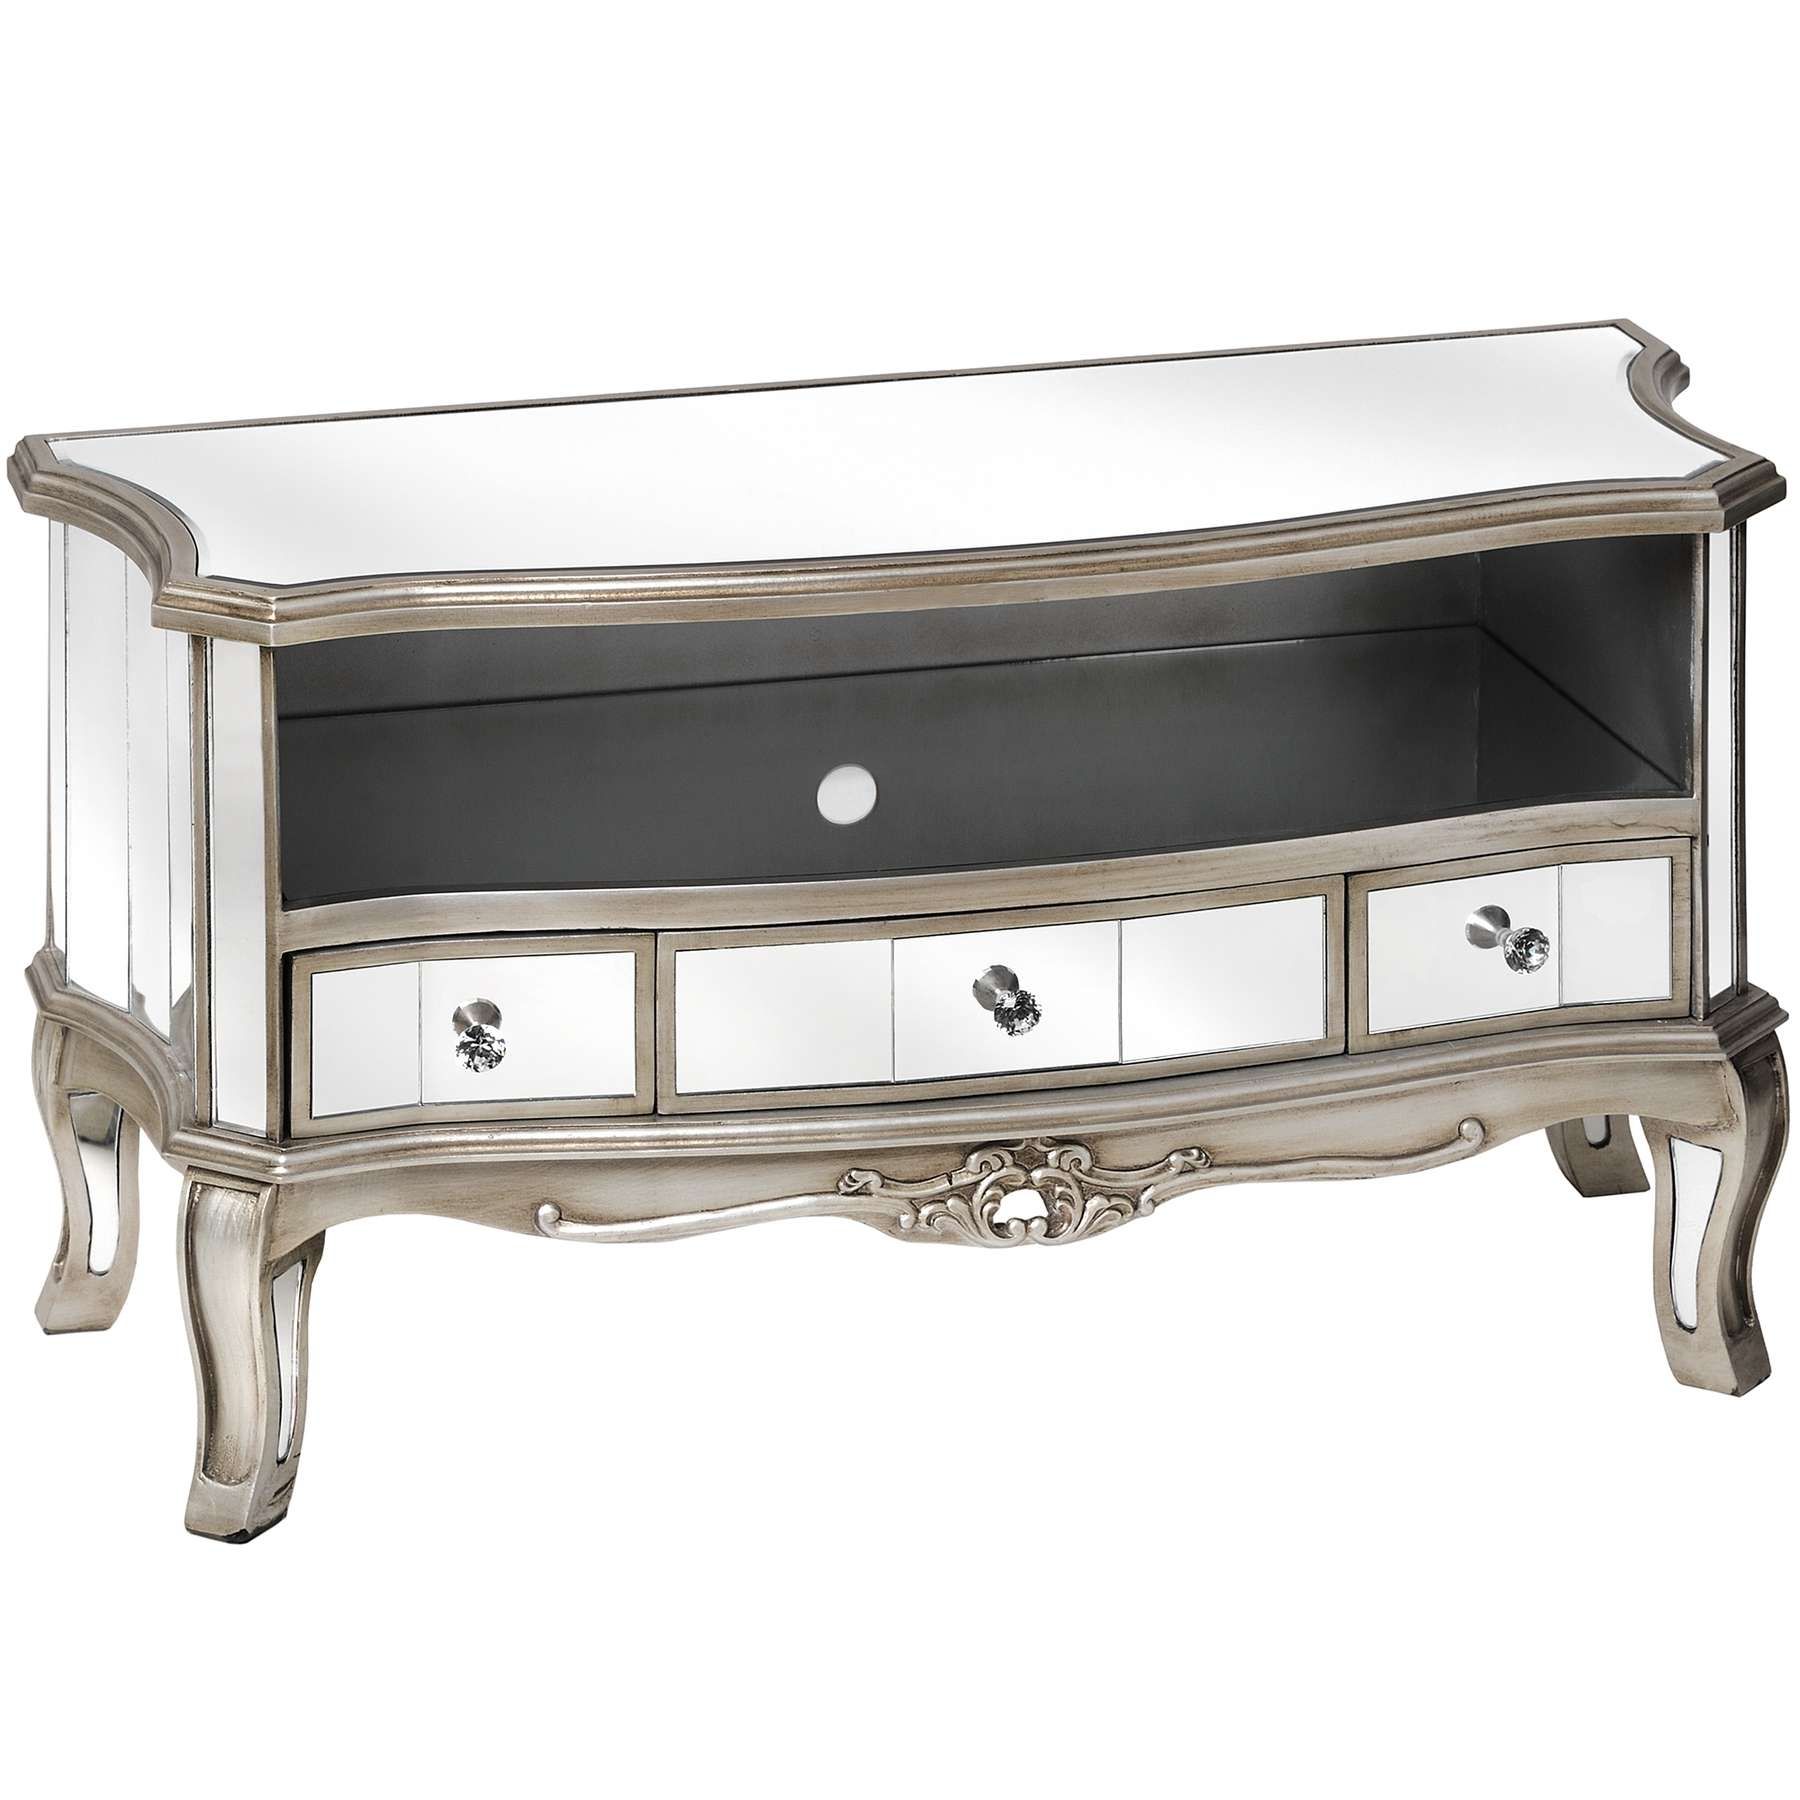 Argente Mirrored Television Cabinet | From Baytree Interiors For Mirrored Tv Stands (Gallery 14 of 15)